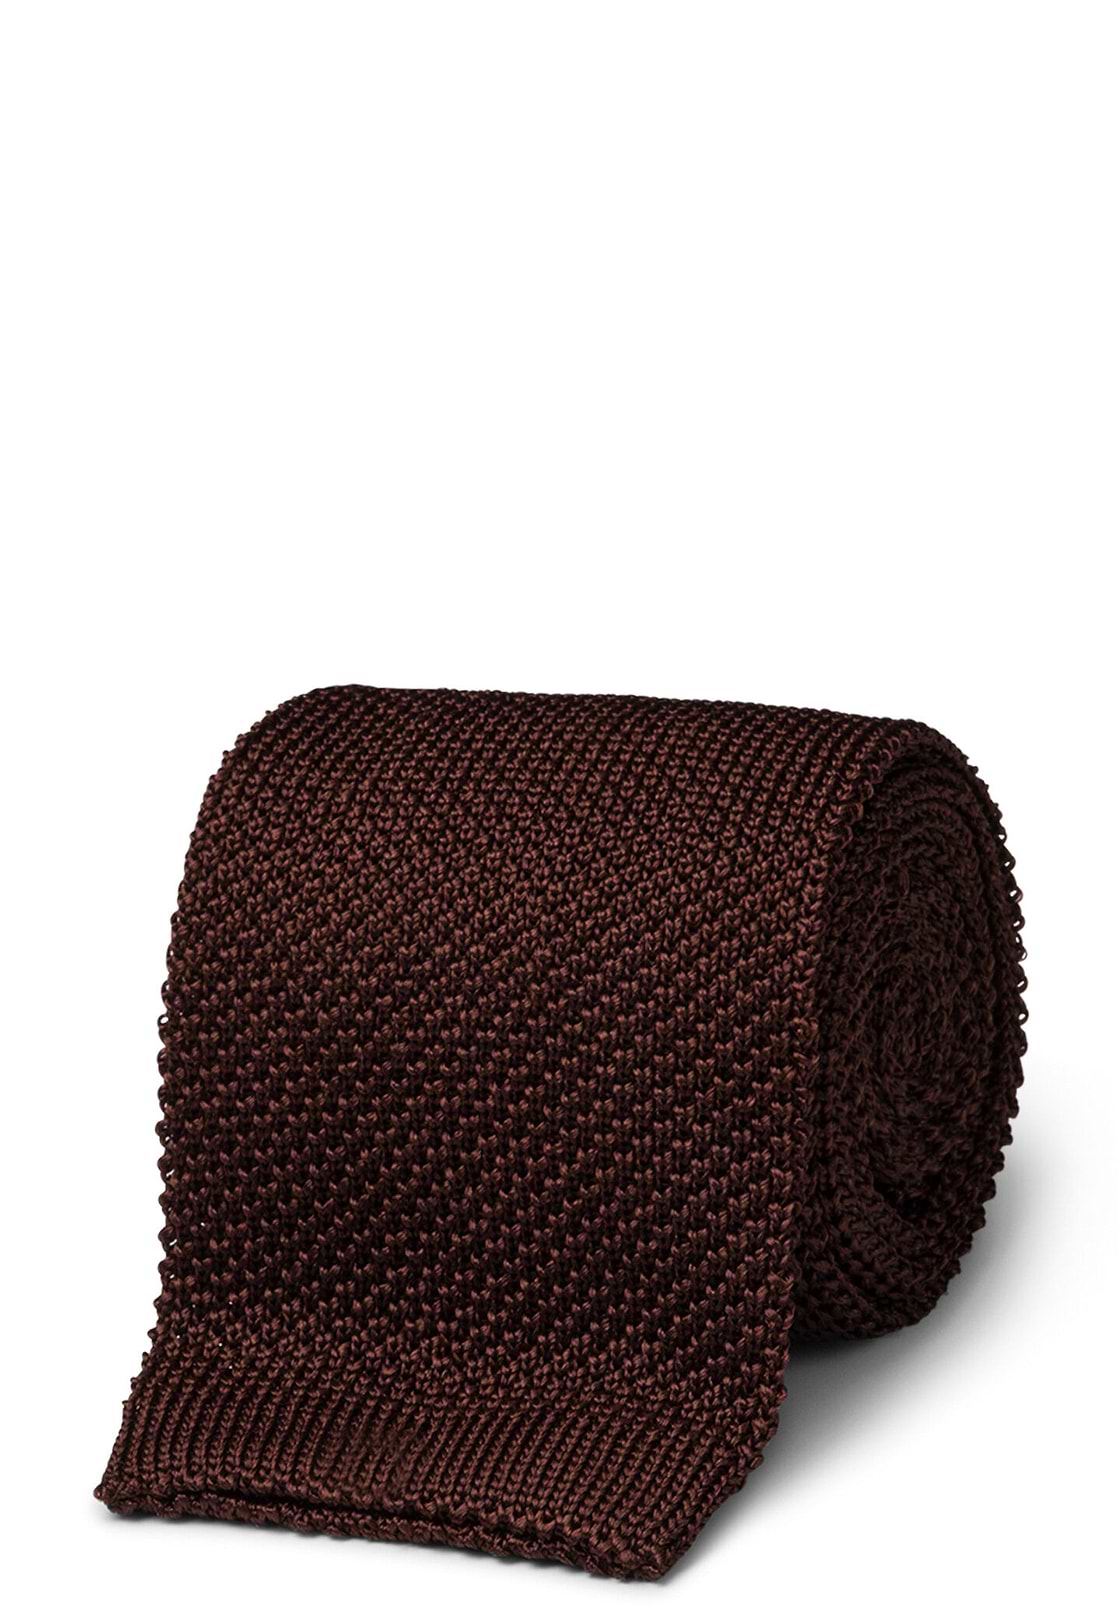 Pure Silk Knitted Tie, Brown, hi-res